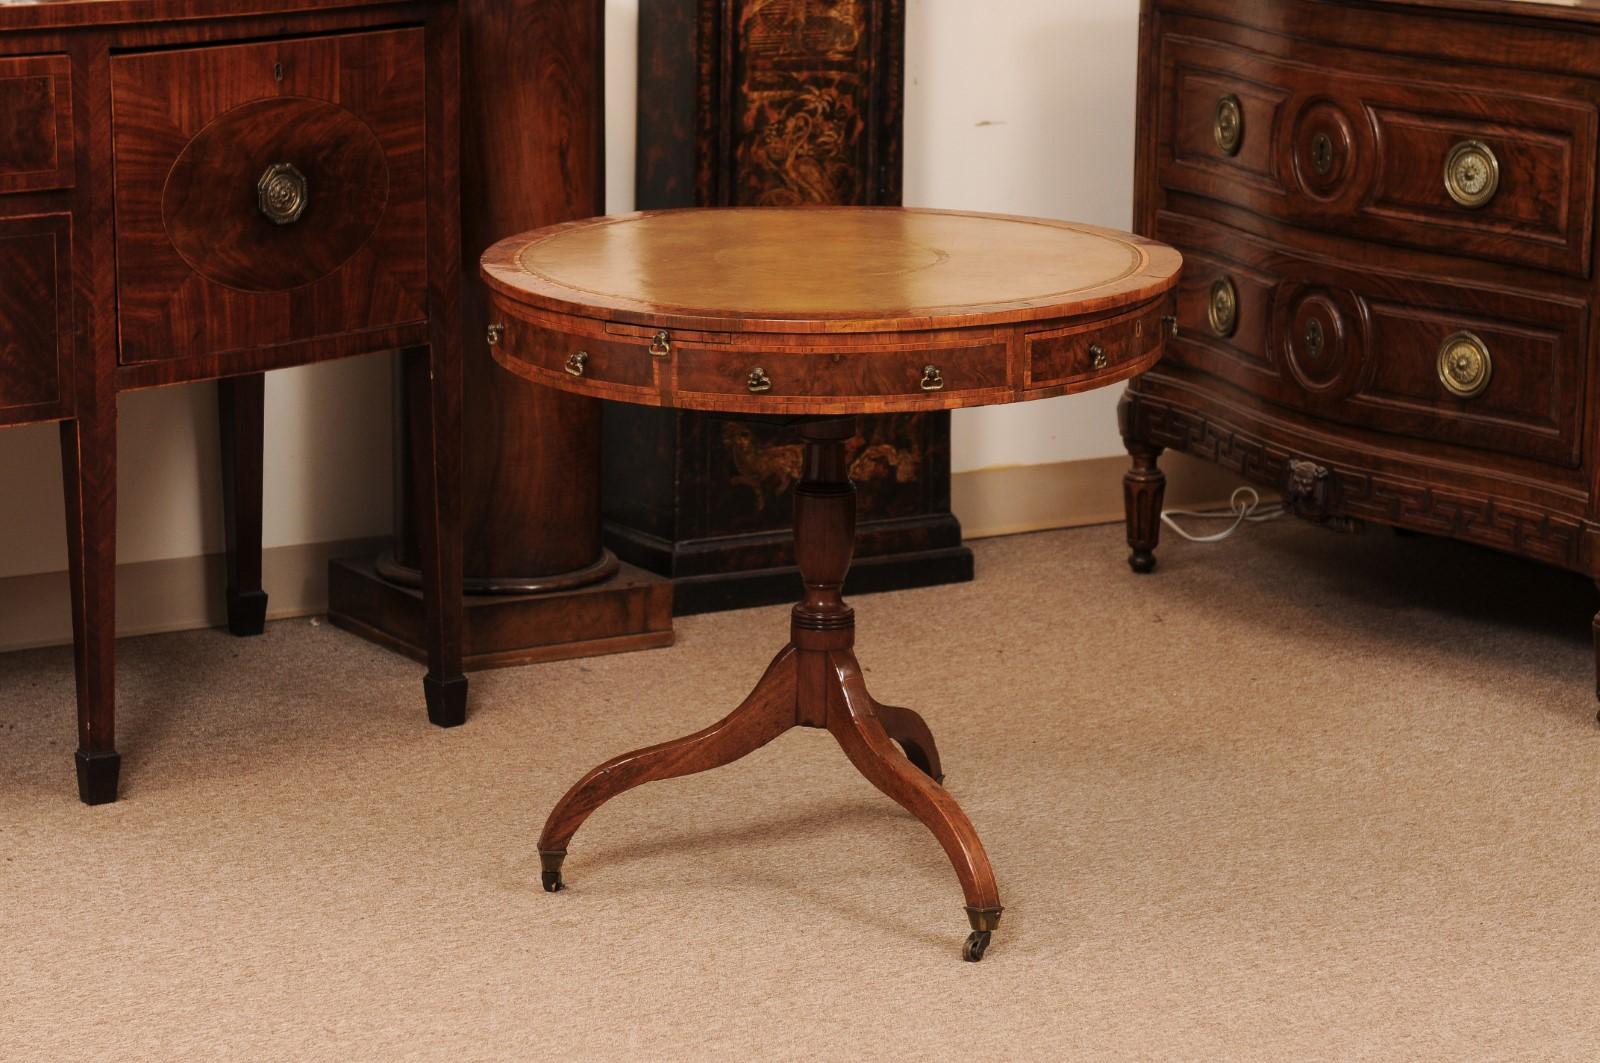 18th Century English Small Mulberry Drum Table with Inlay & Leather Top For Sale 9